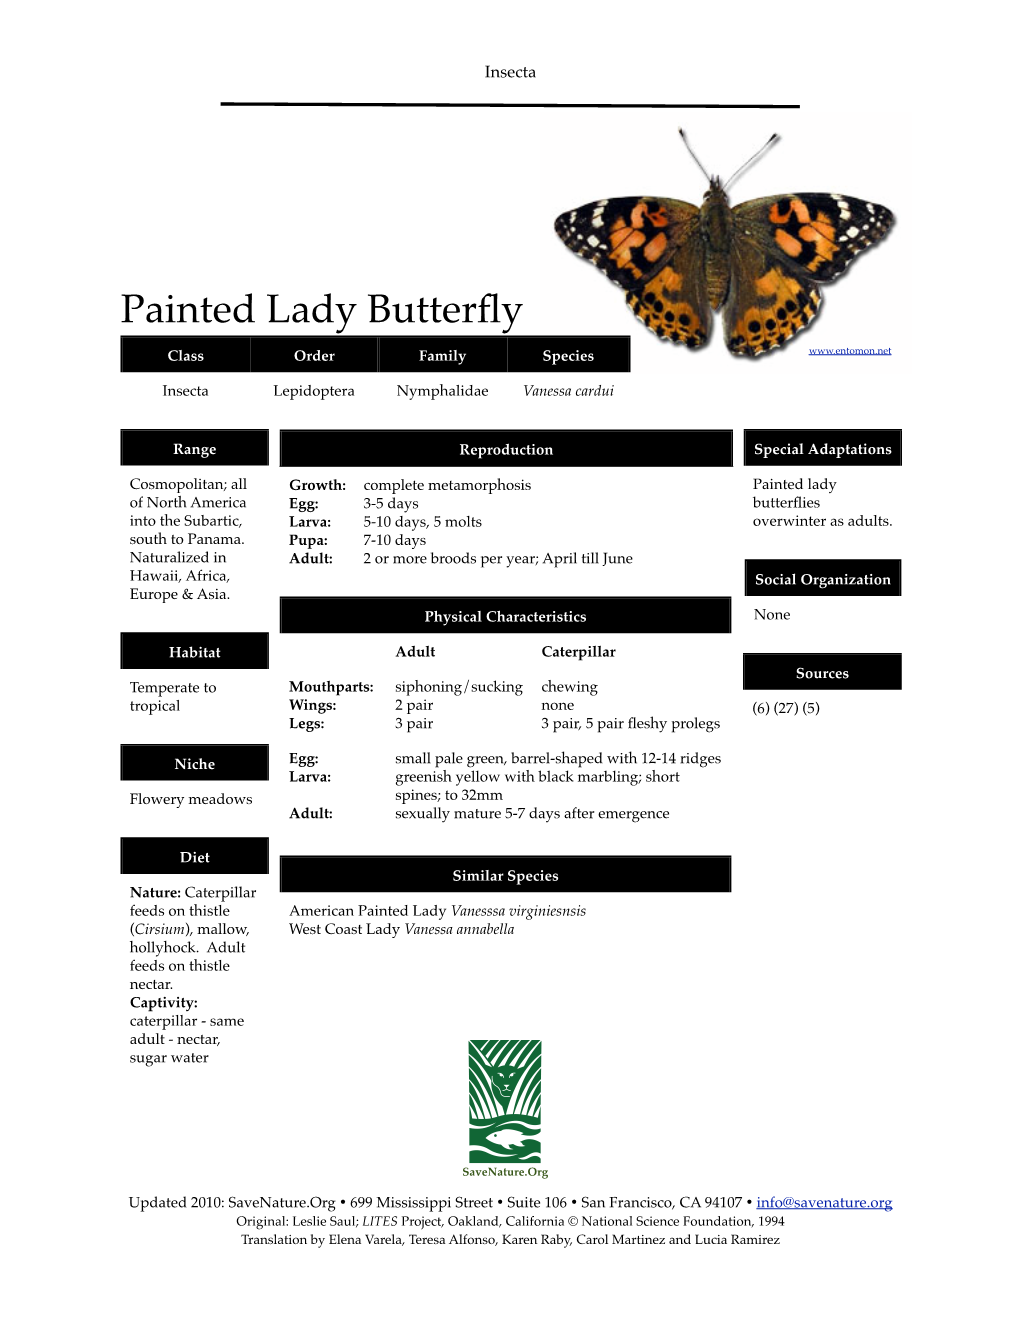 Painted Lady Butterfly Info Sheet